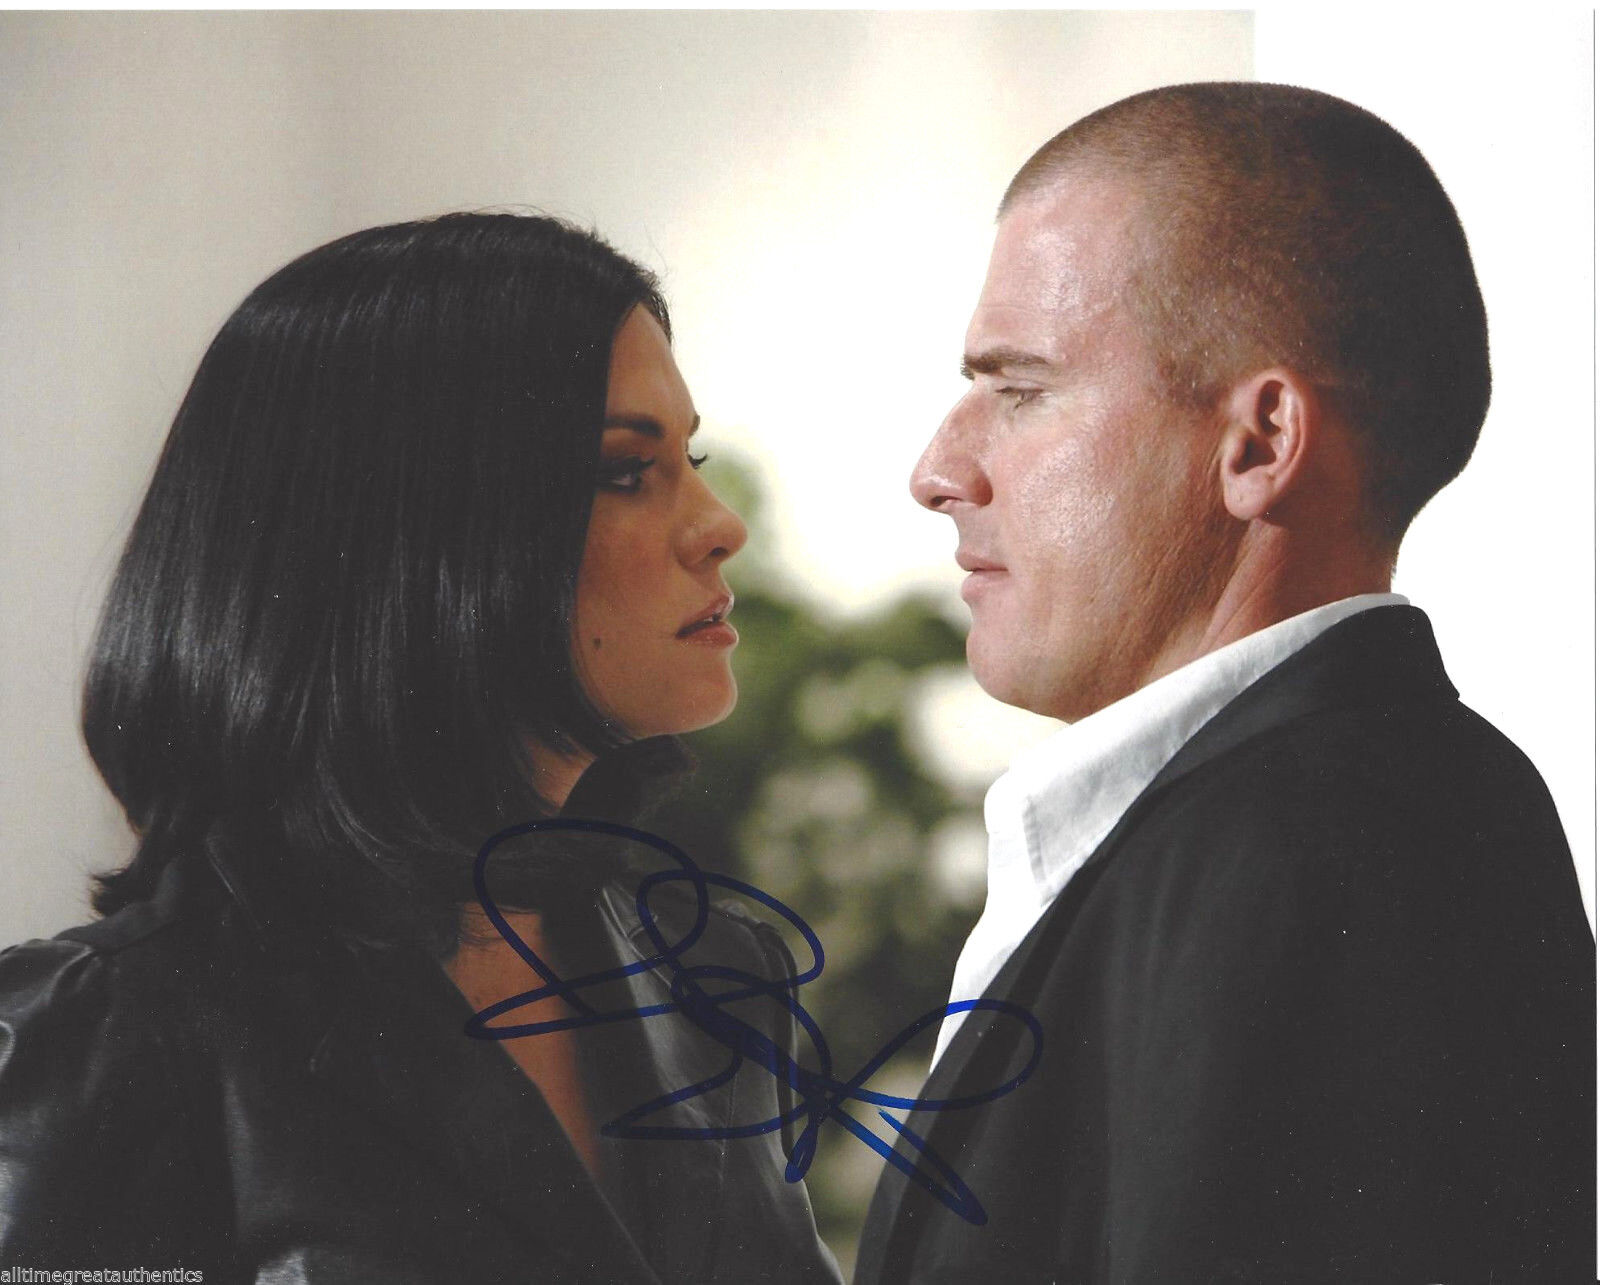 ACTRESS JODI LYN O'KEEFE SIGNED AUTHENTIC 'PRISON BREAK' 8X10 Photo Poster painting w/COA TV